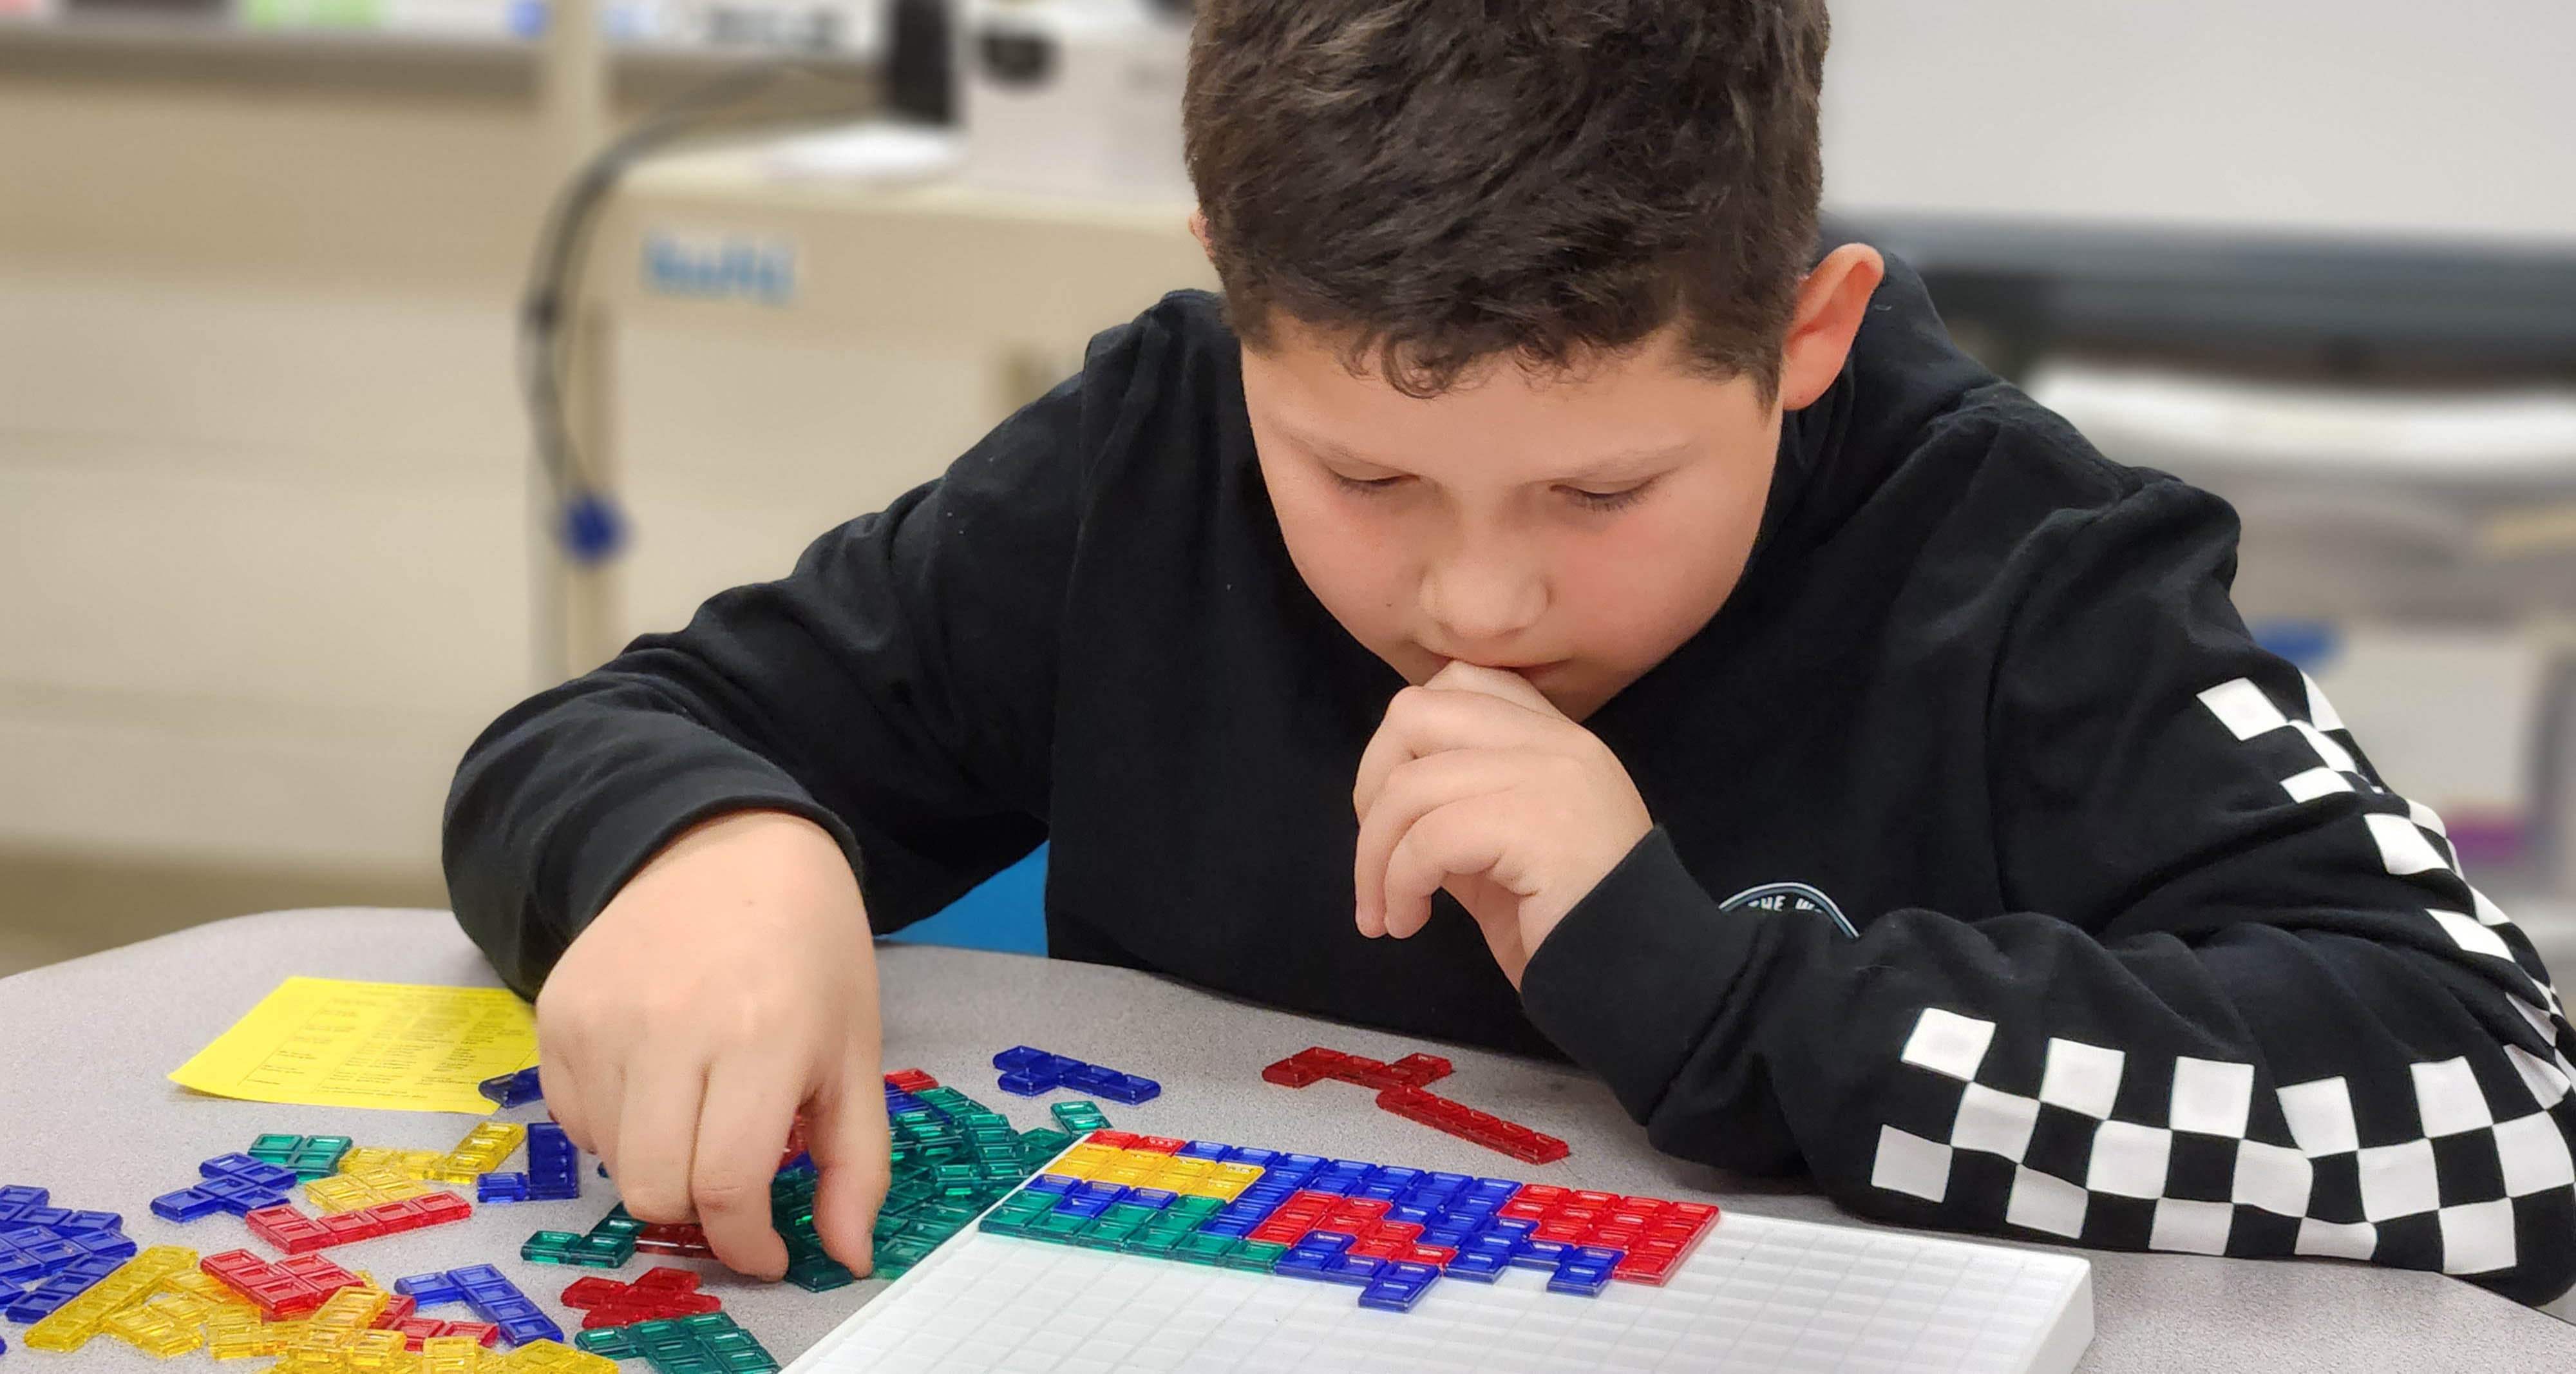 A student focused in class while put shapes in a specific position